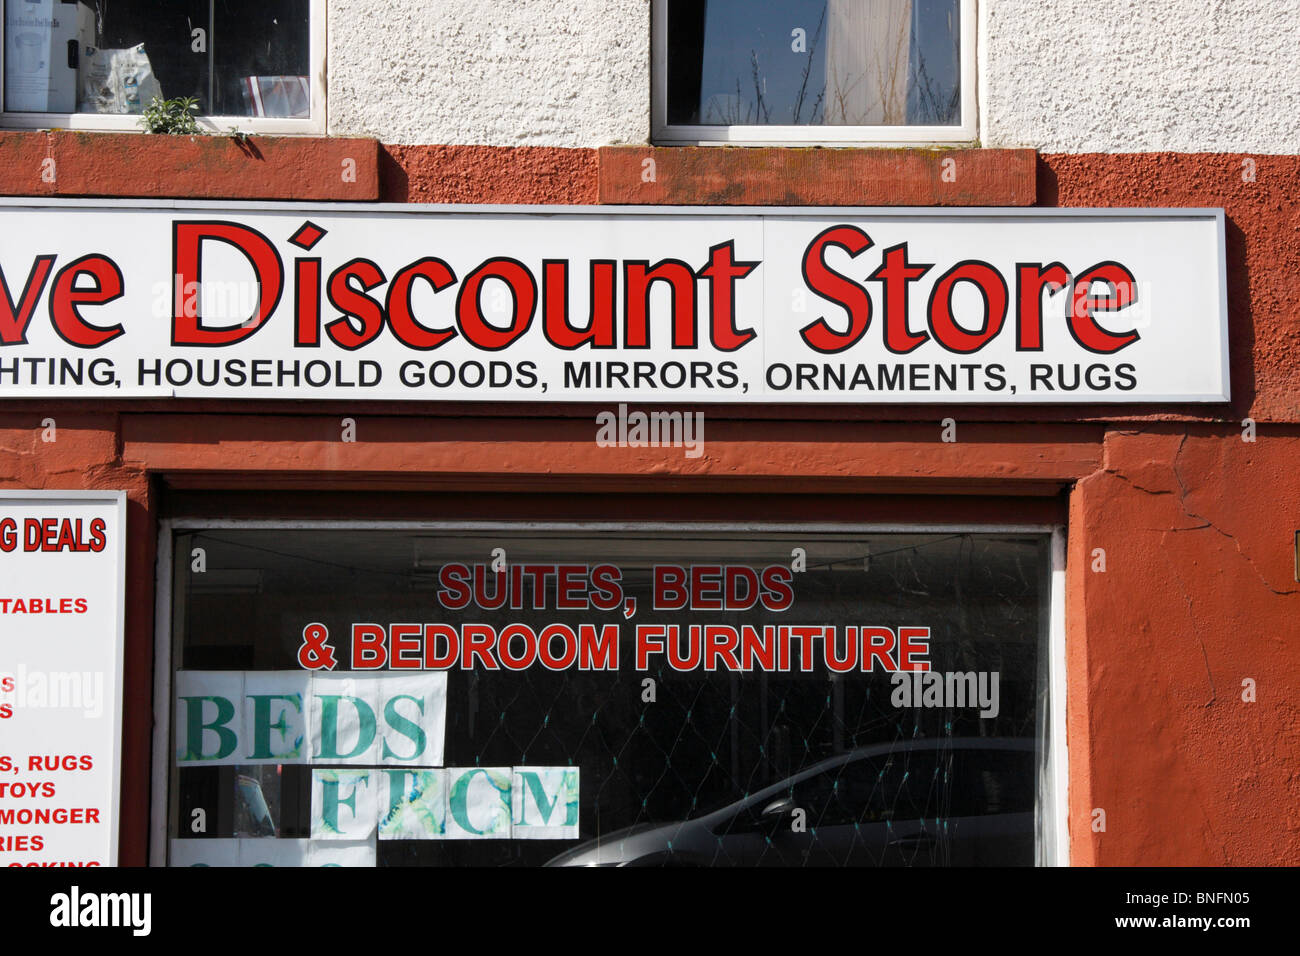 discount-store-sign-above-shop-stock-photo-alamy